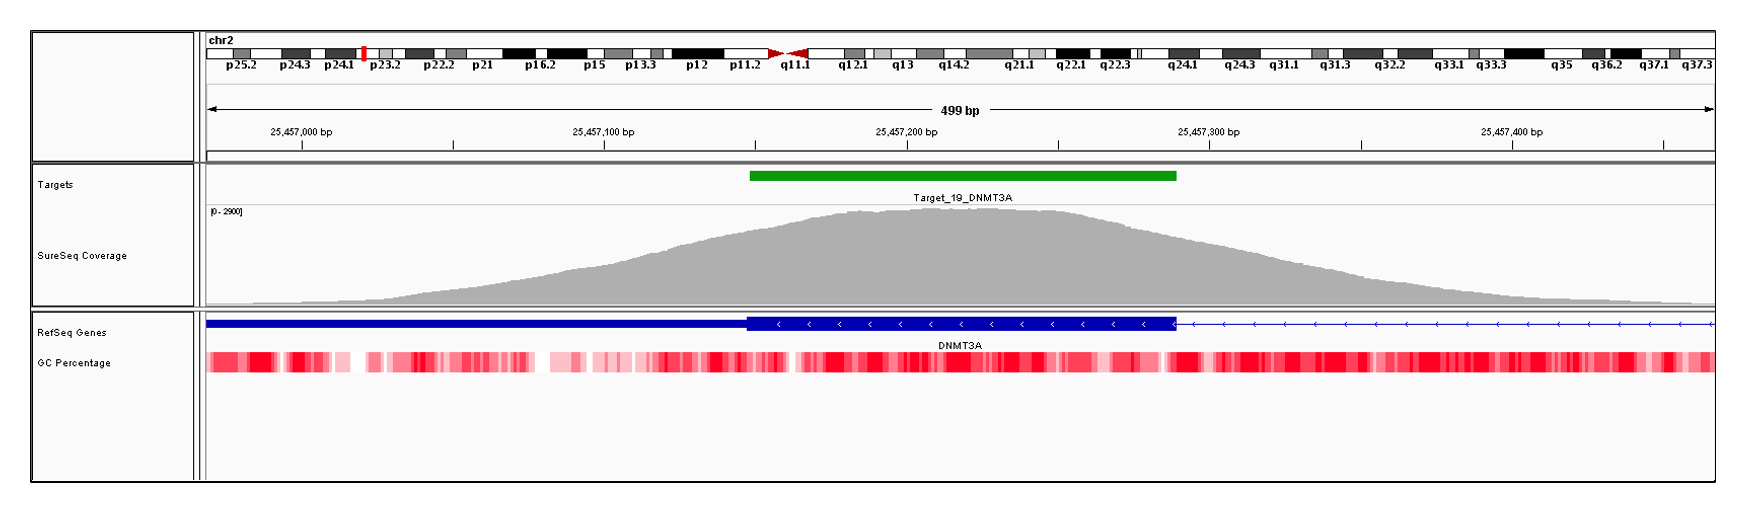 DNMT3A Exon 23 (hg19 chr2:25455830-25457289). Depth of coverage per base (grey). Targeted region (green). Gene coding region as defined by RefSeq (blue). GC percentage (red). Image